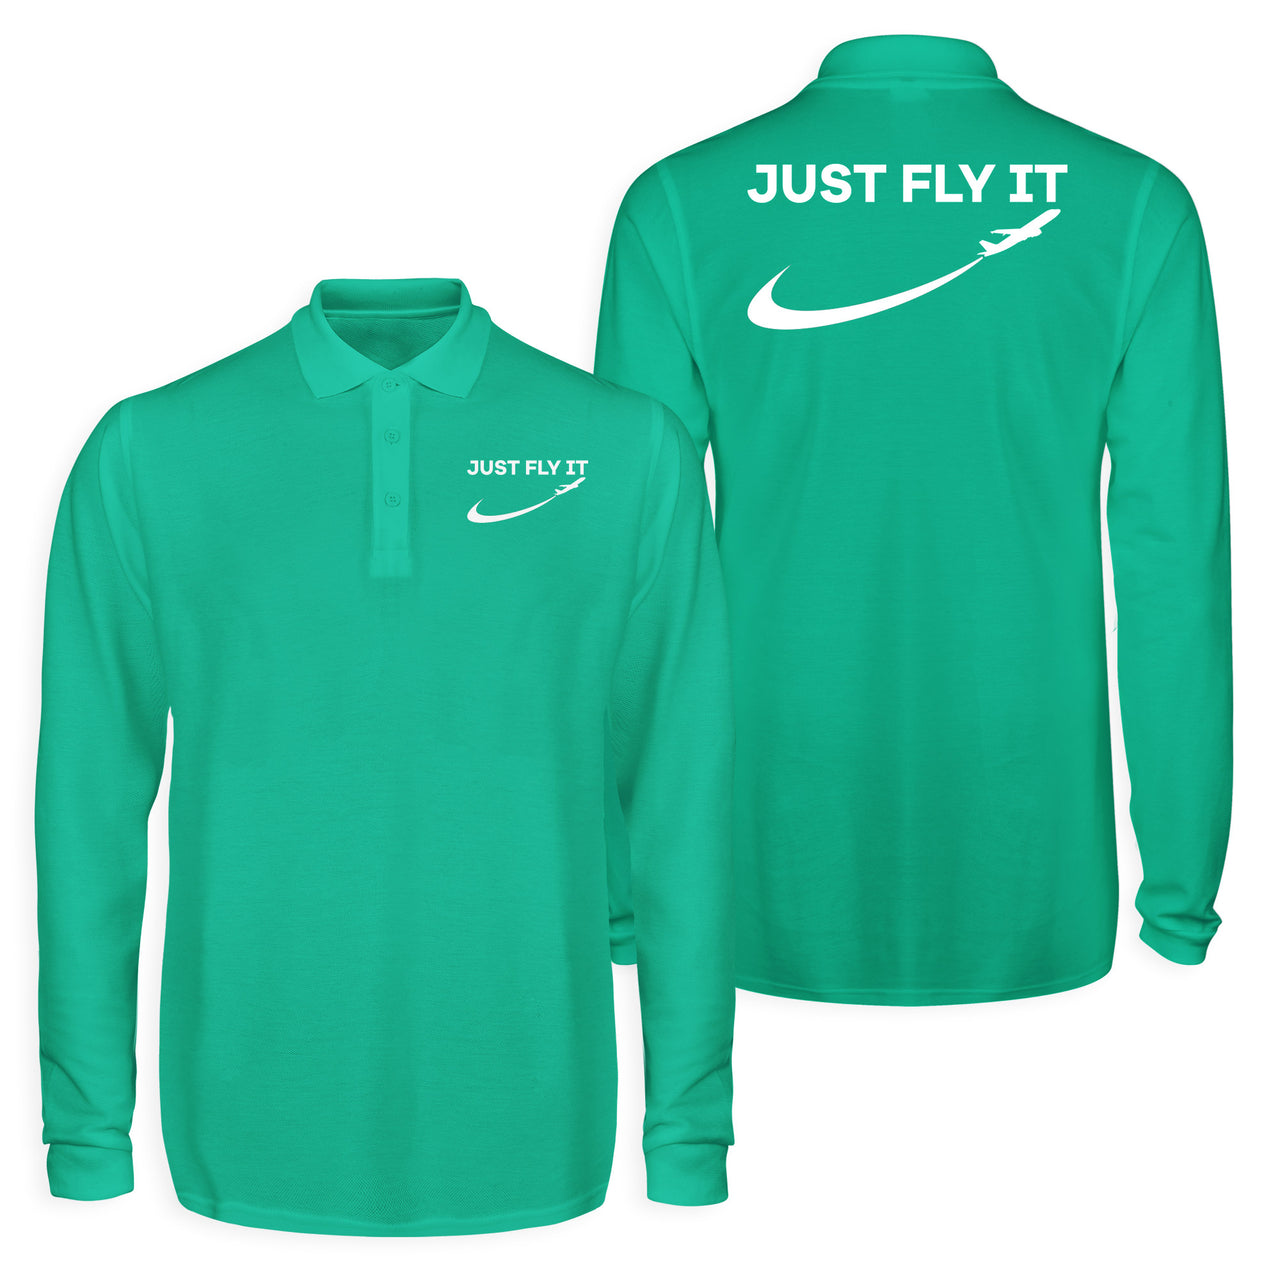 Just Fly It 2 Designed Long Sleeve Polo T-Shirts (Double-Side)